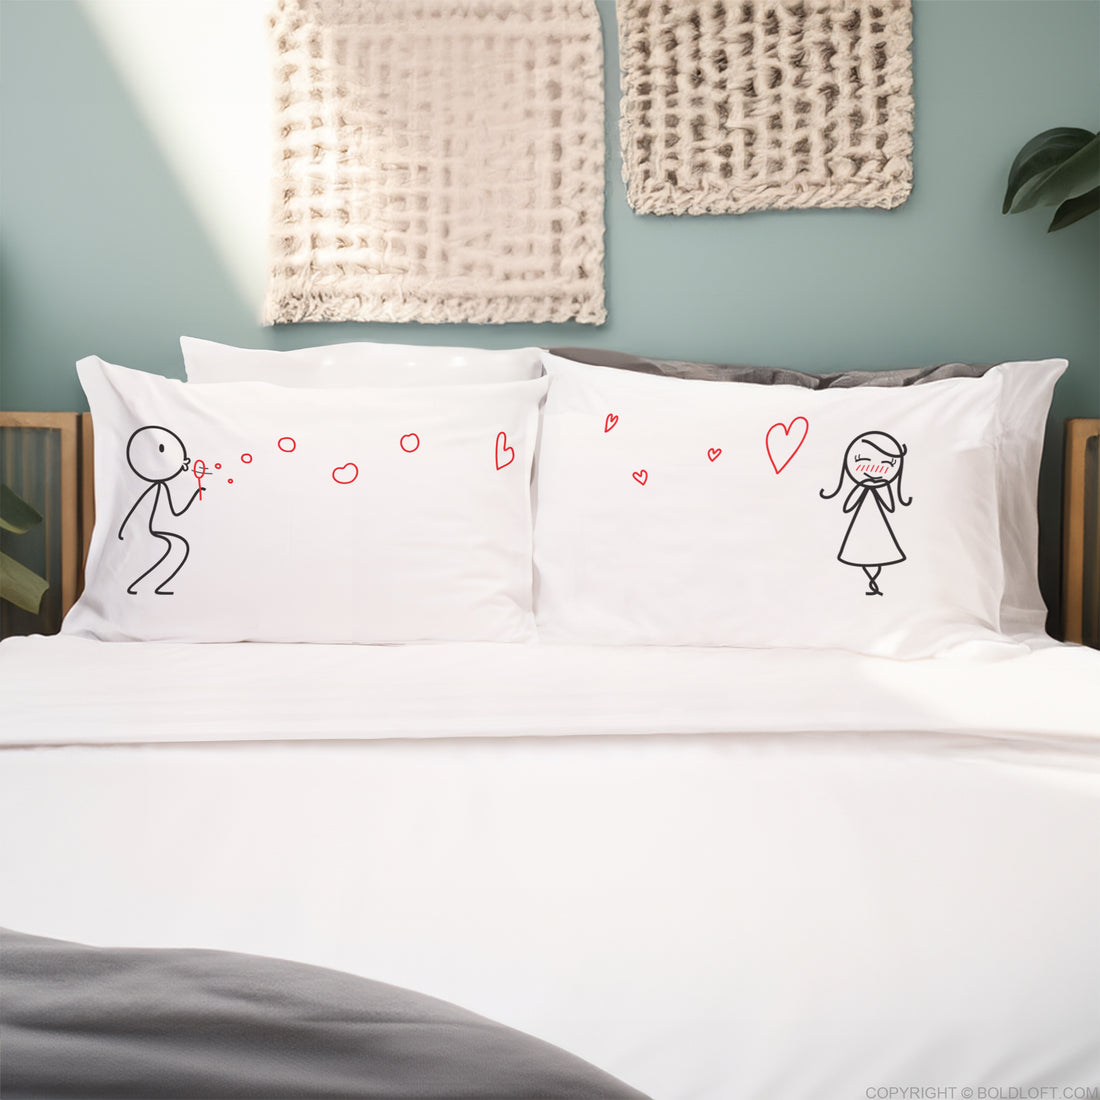 BoldLoft From My Heart to Yours Couple Pillowcases, his and hers pillowcases with stick figures blowing heart-shaped bubbles